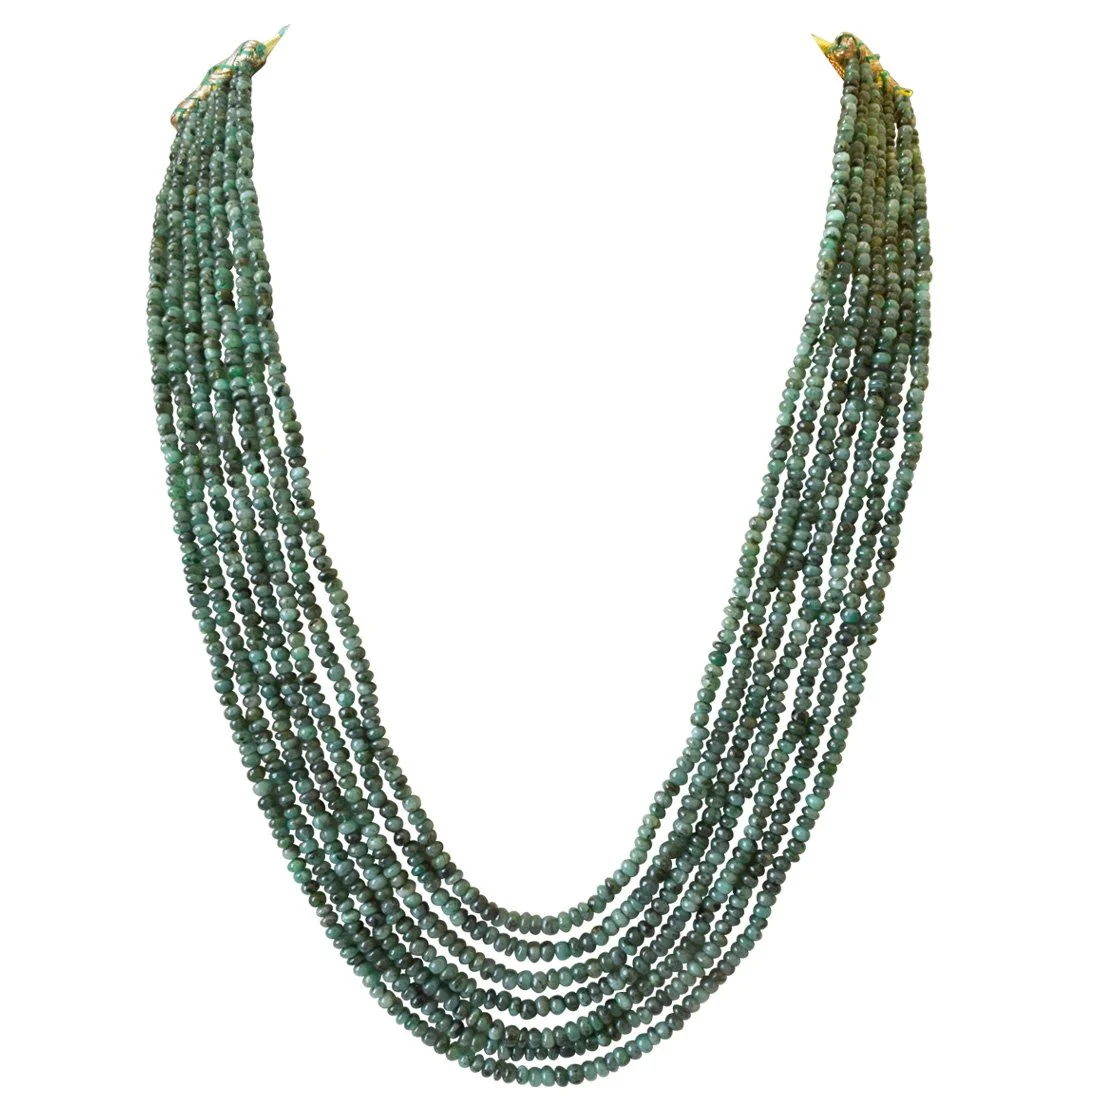 7 Line 366cts REAL Natural Green Emerald Beads Necklace for Women (366cts EMR Neck)